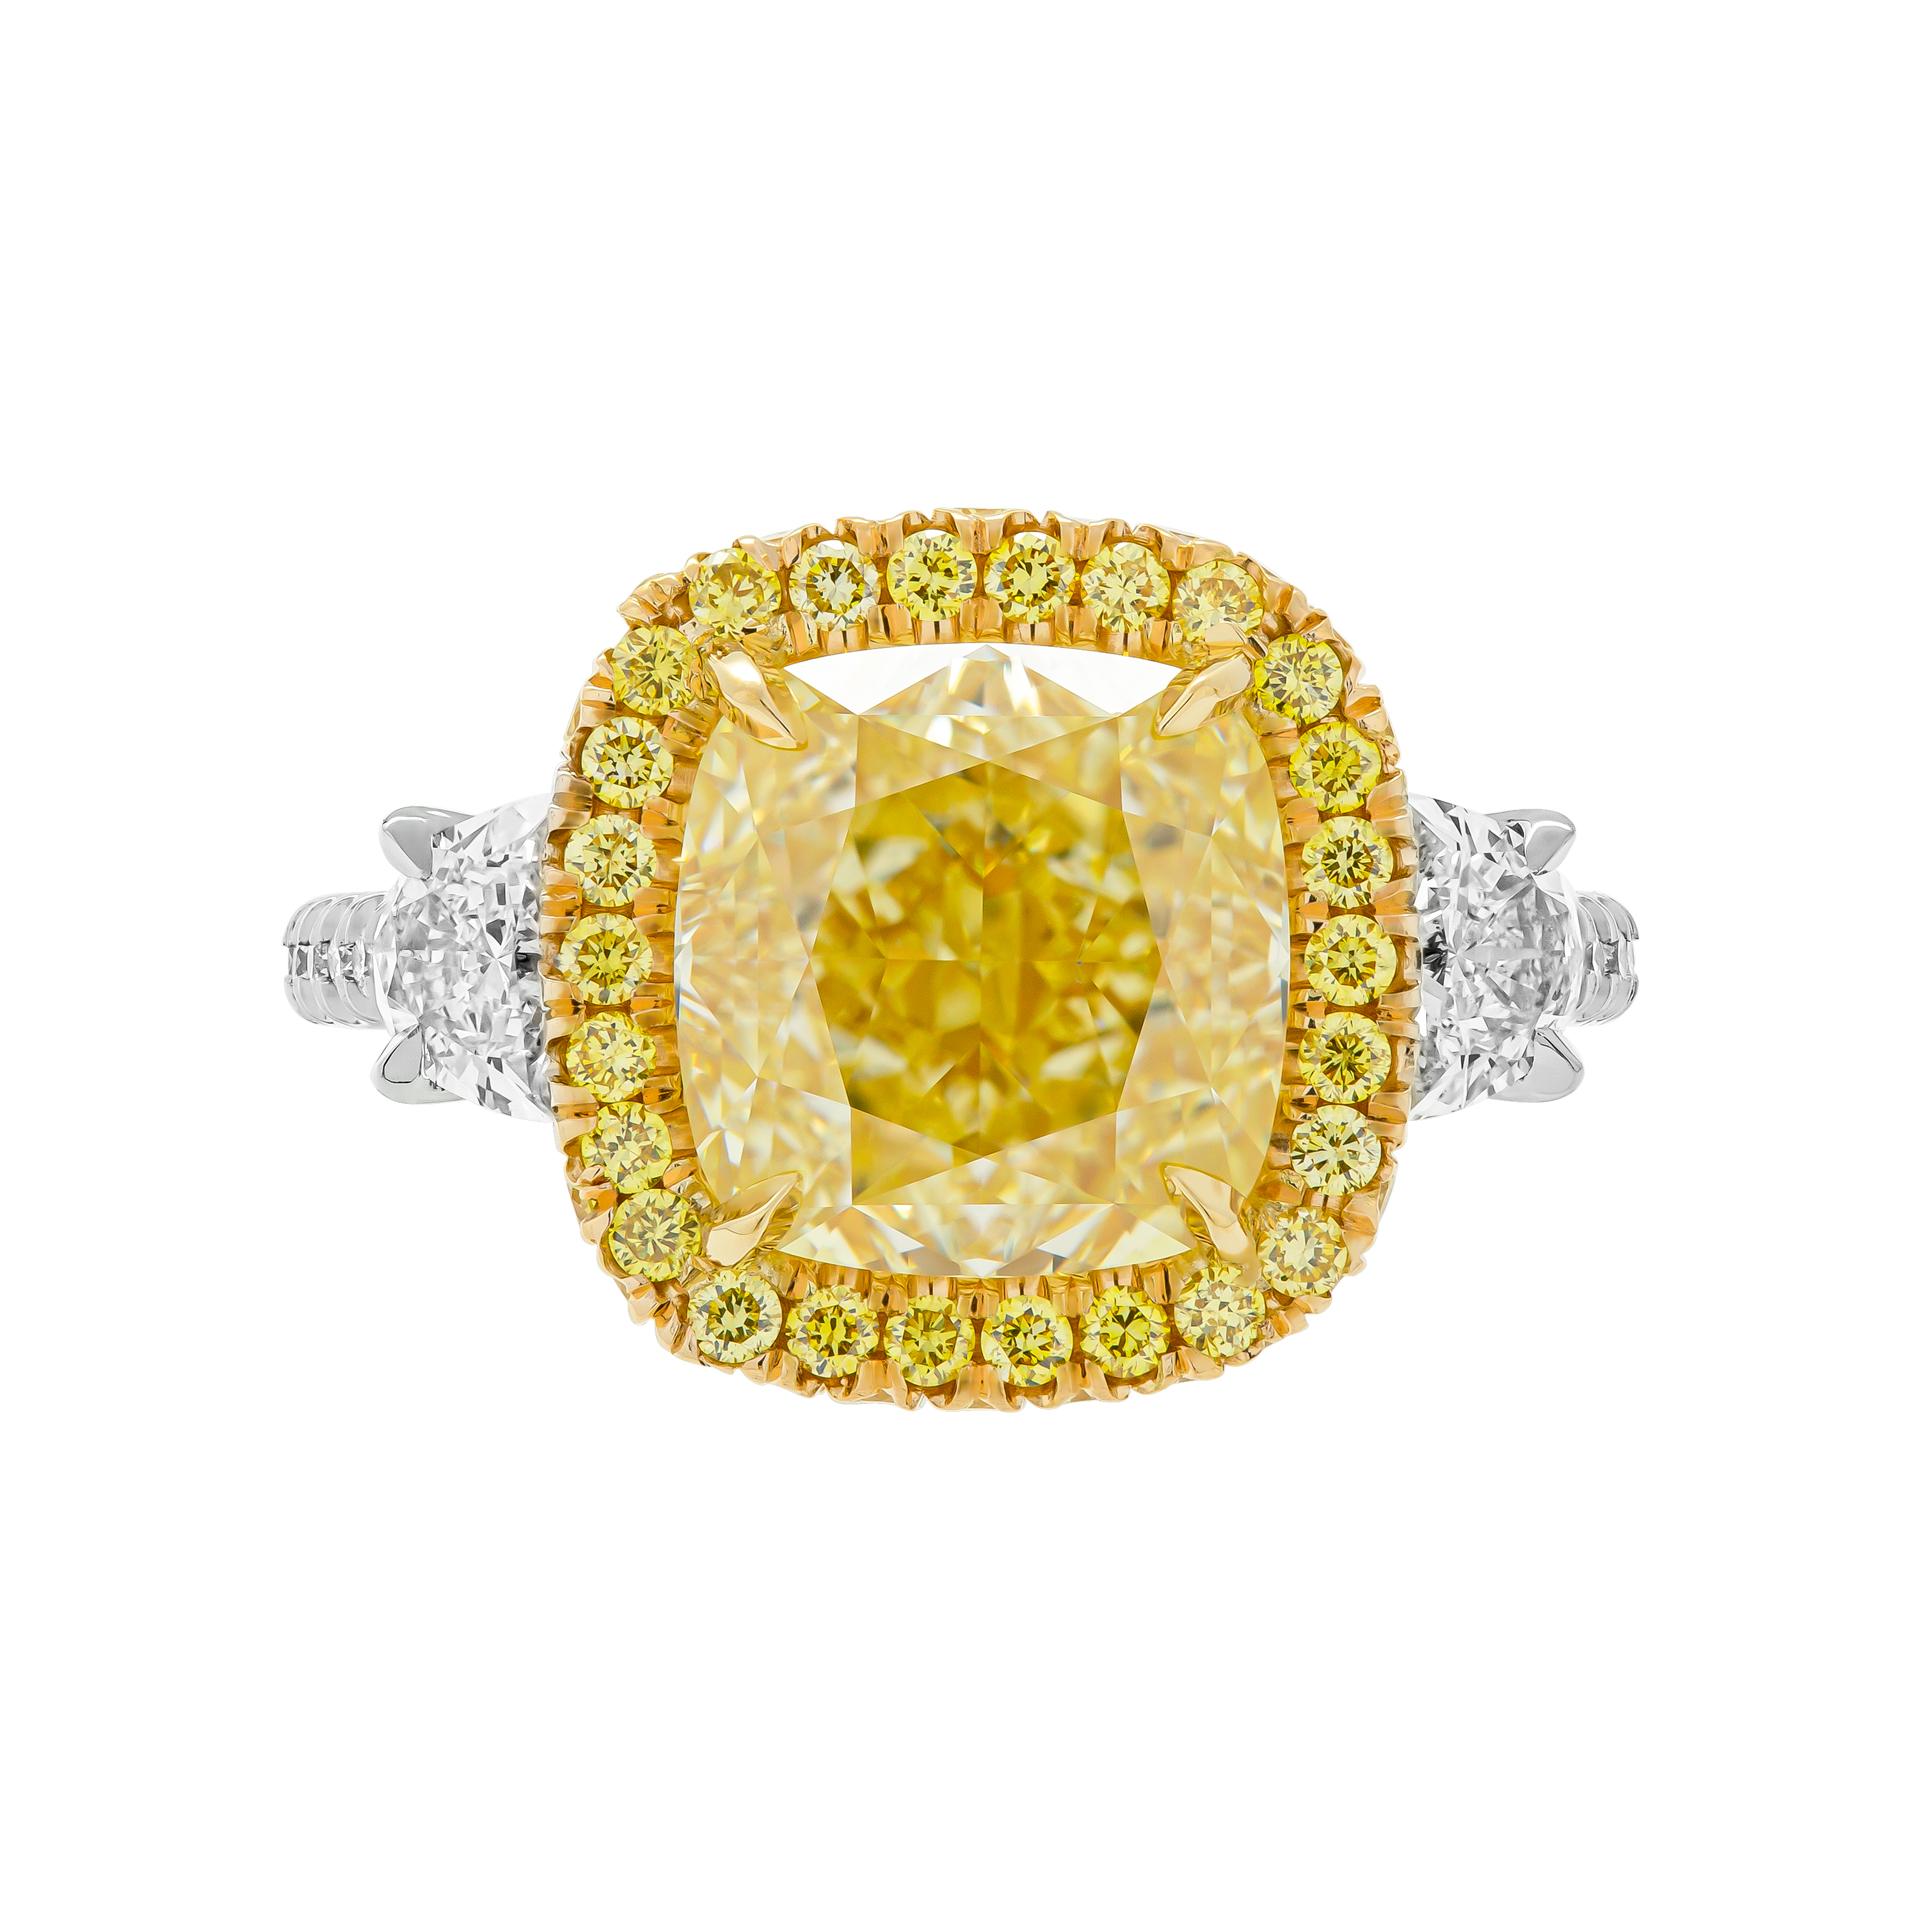 Three stone ring in 18K Yellow Gold & Platinum 
Center stone: 4.51ct Fancy Yellow VS1 GIA#5222558510
Side stones: 0.53ct F-G VS halfmoons
Total Carat Weight of White stones: 0.18ct
Total Carat Weight of Yellow stones: 0.44ct
Total Carat Weight of